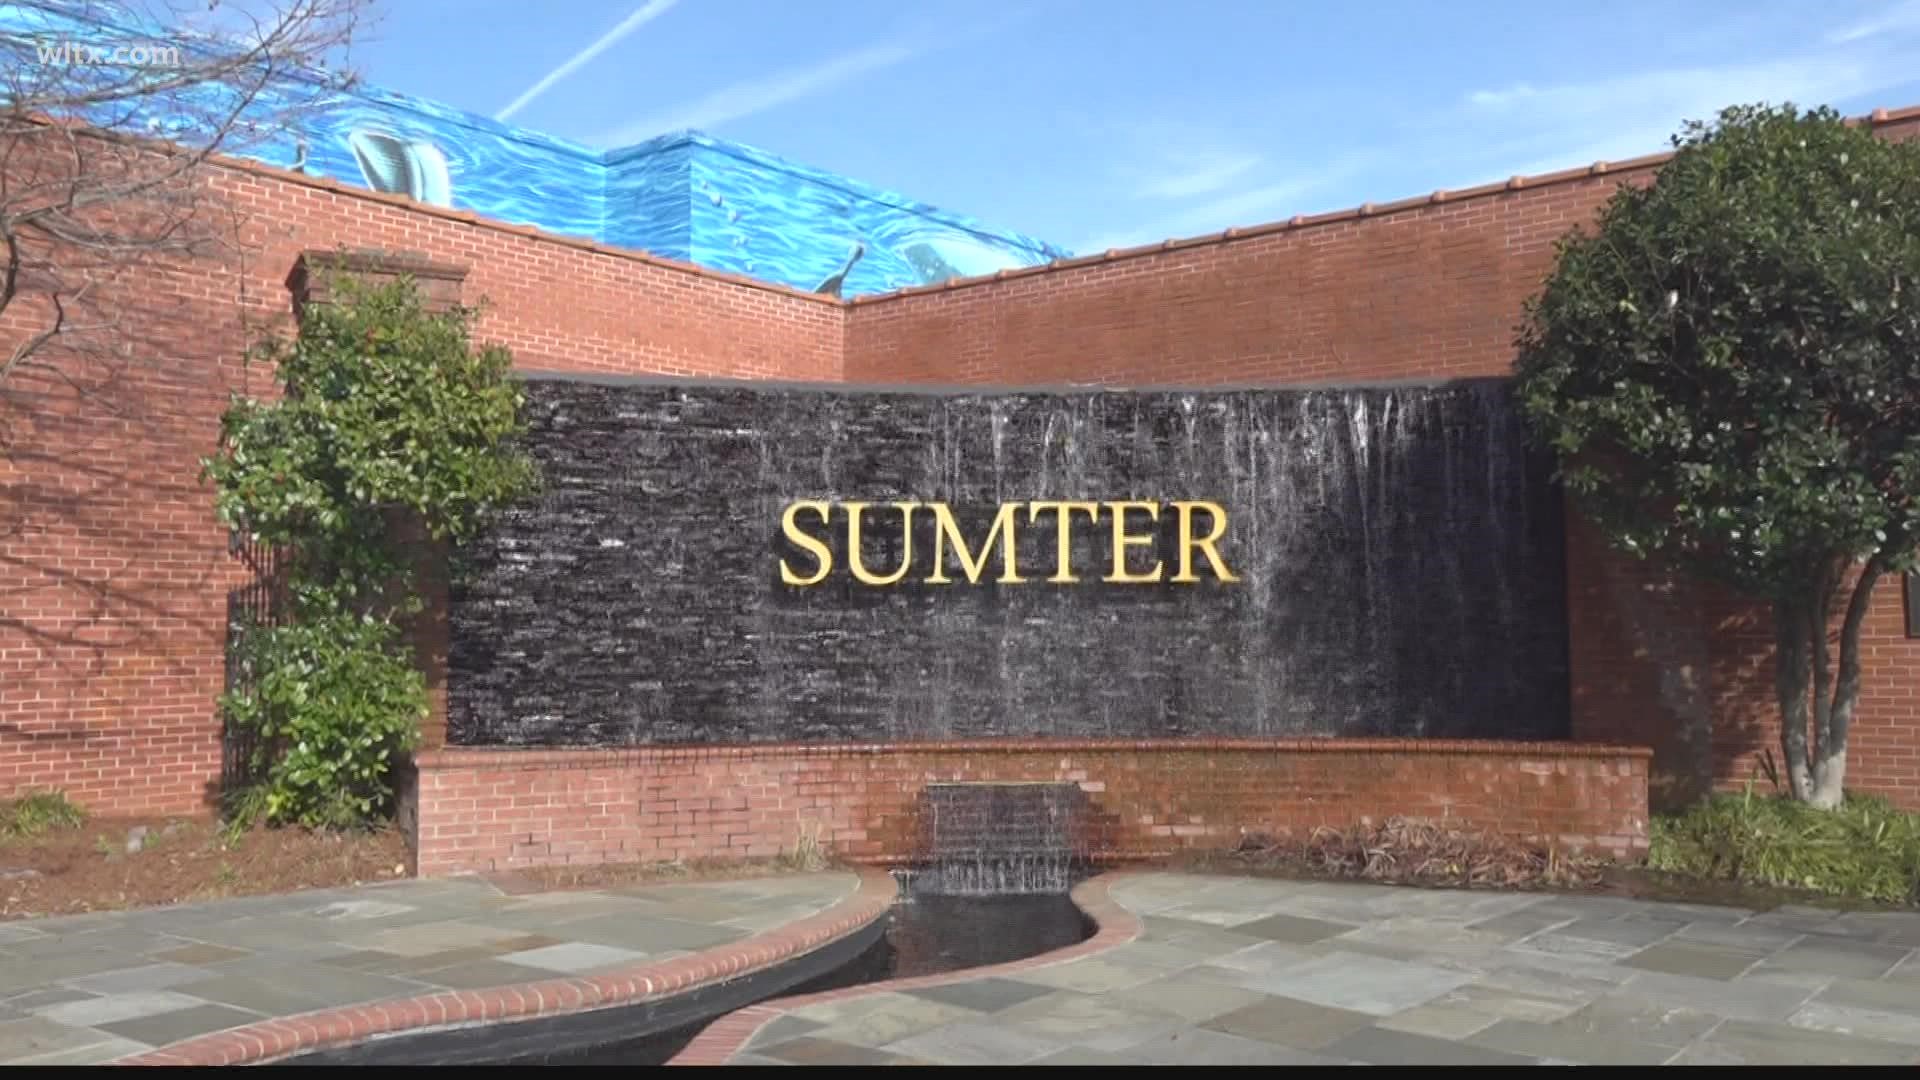 Demolition, housing repairs and youth programs are a few of the plans the city of Sumter wants to complete this year.